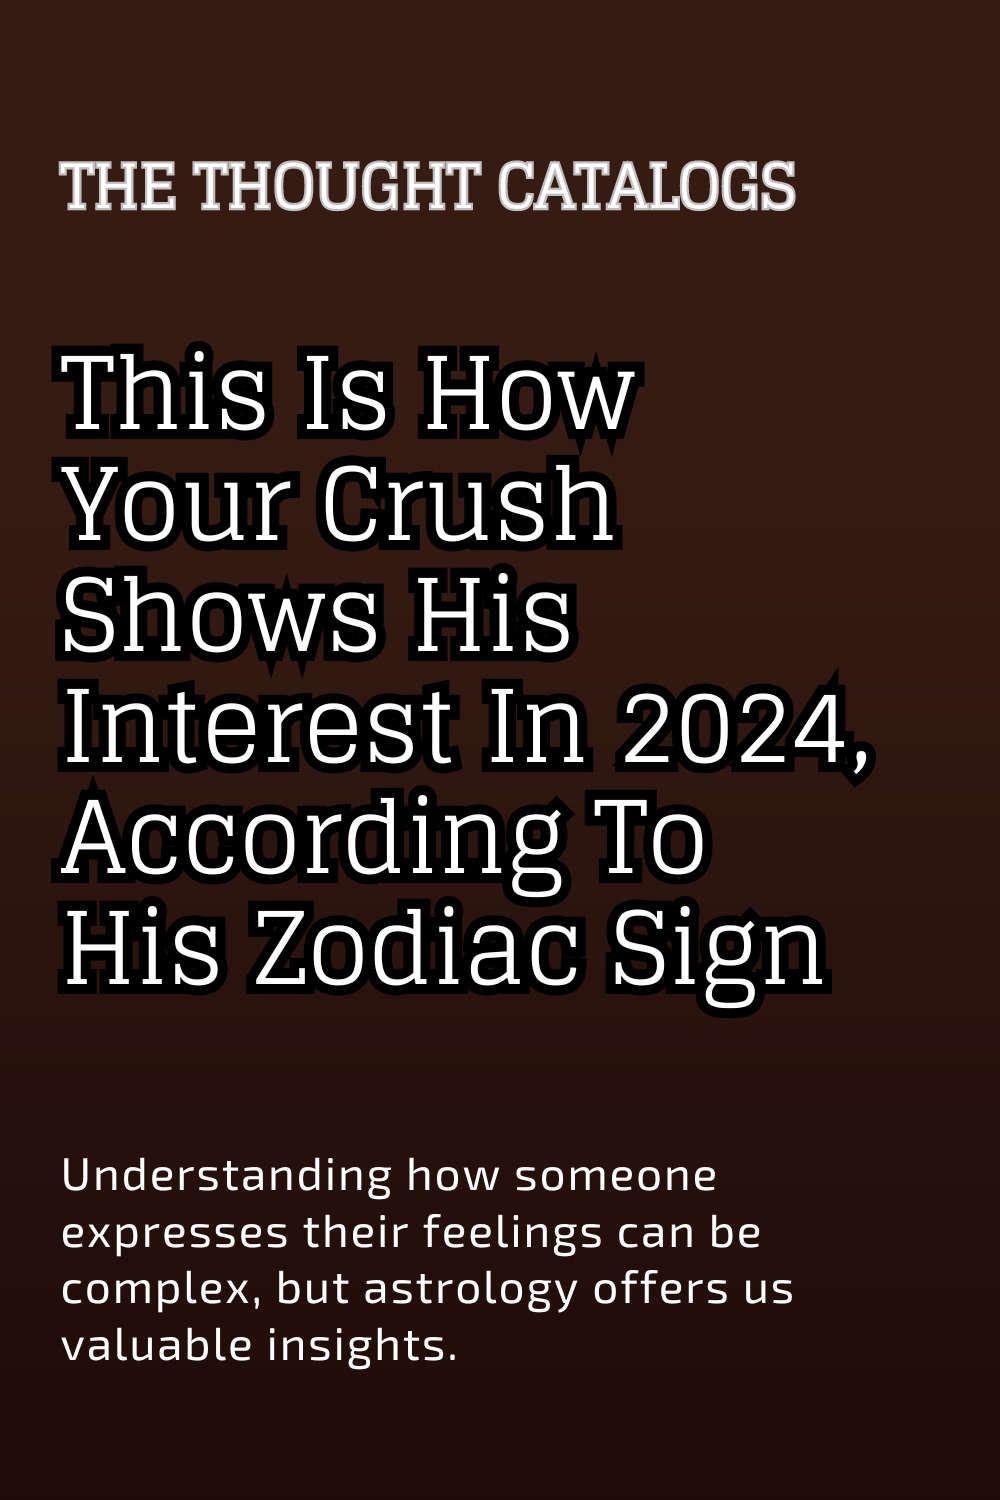 This Is How Your Crush Shows His Interest In 2024, According To His Zodiac Sign